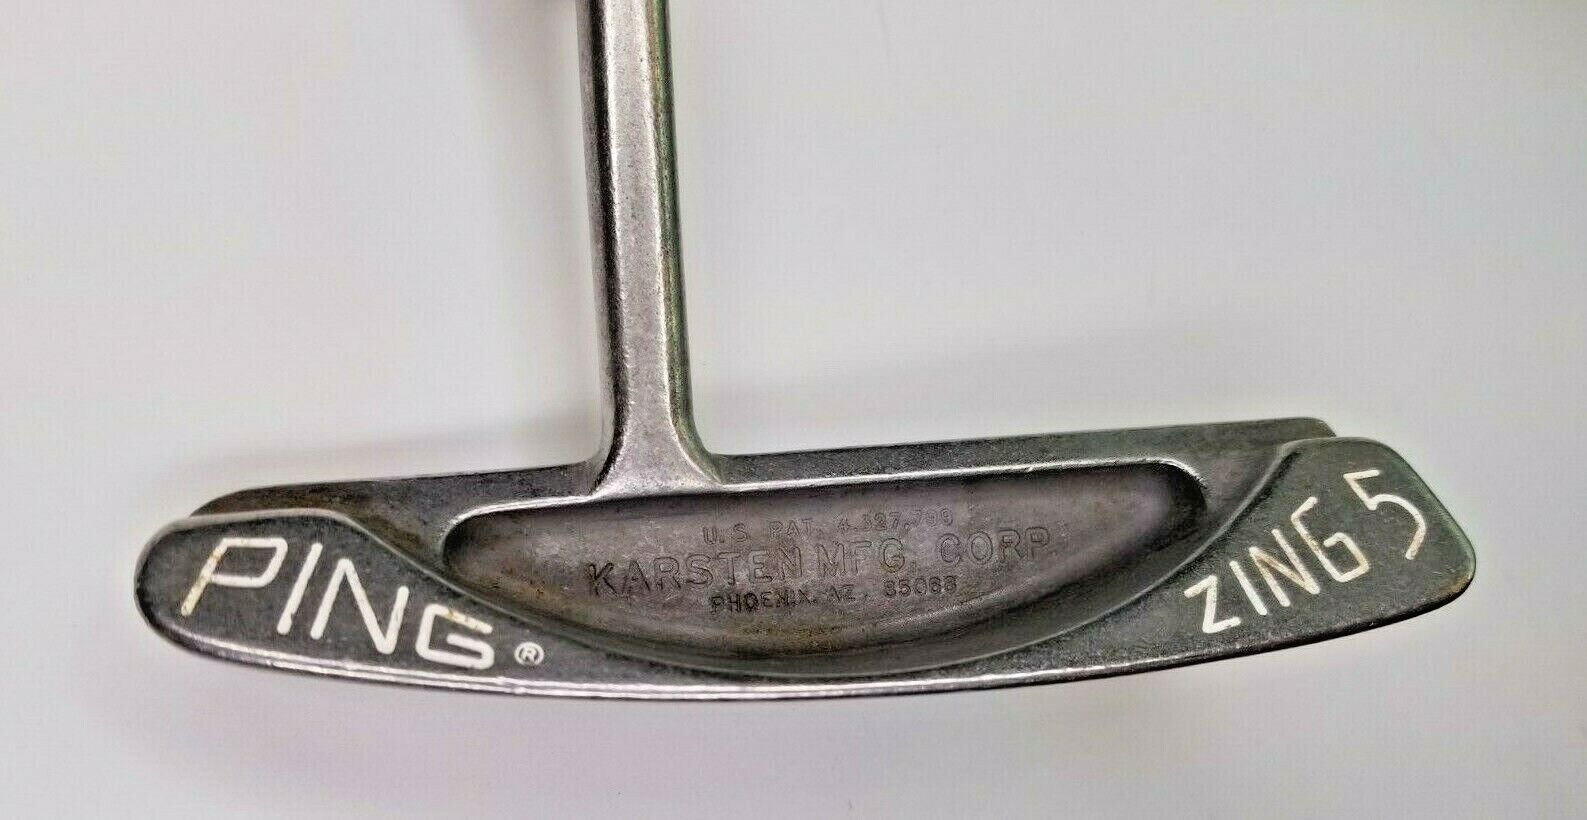 PING ZING 5 Putter 36.5 Inches, Right Hand, PING Grip nice cond. Karsten GC03